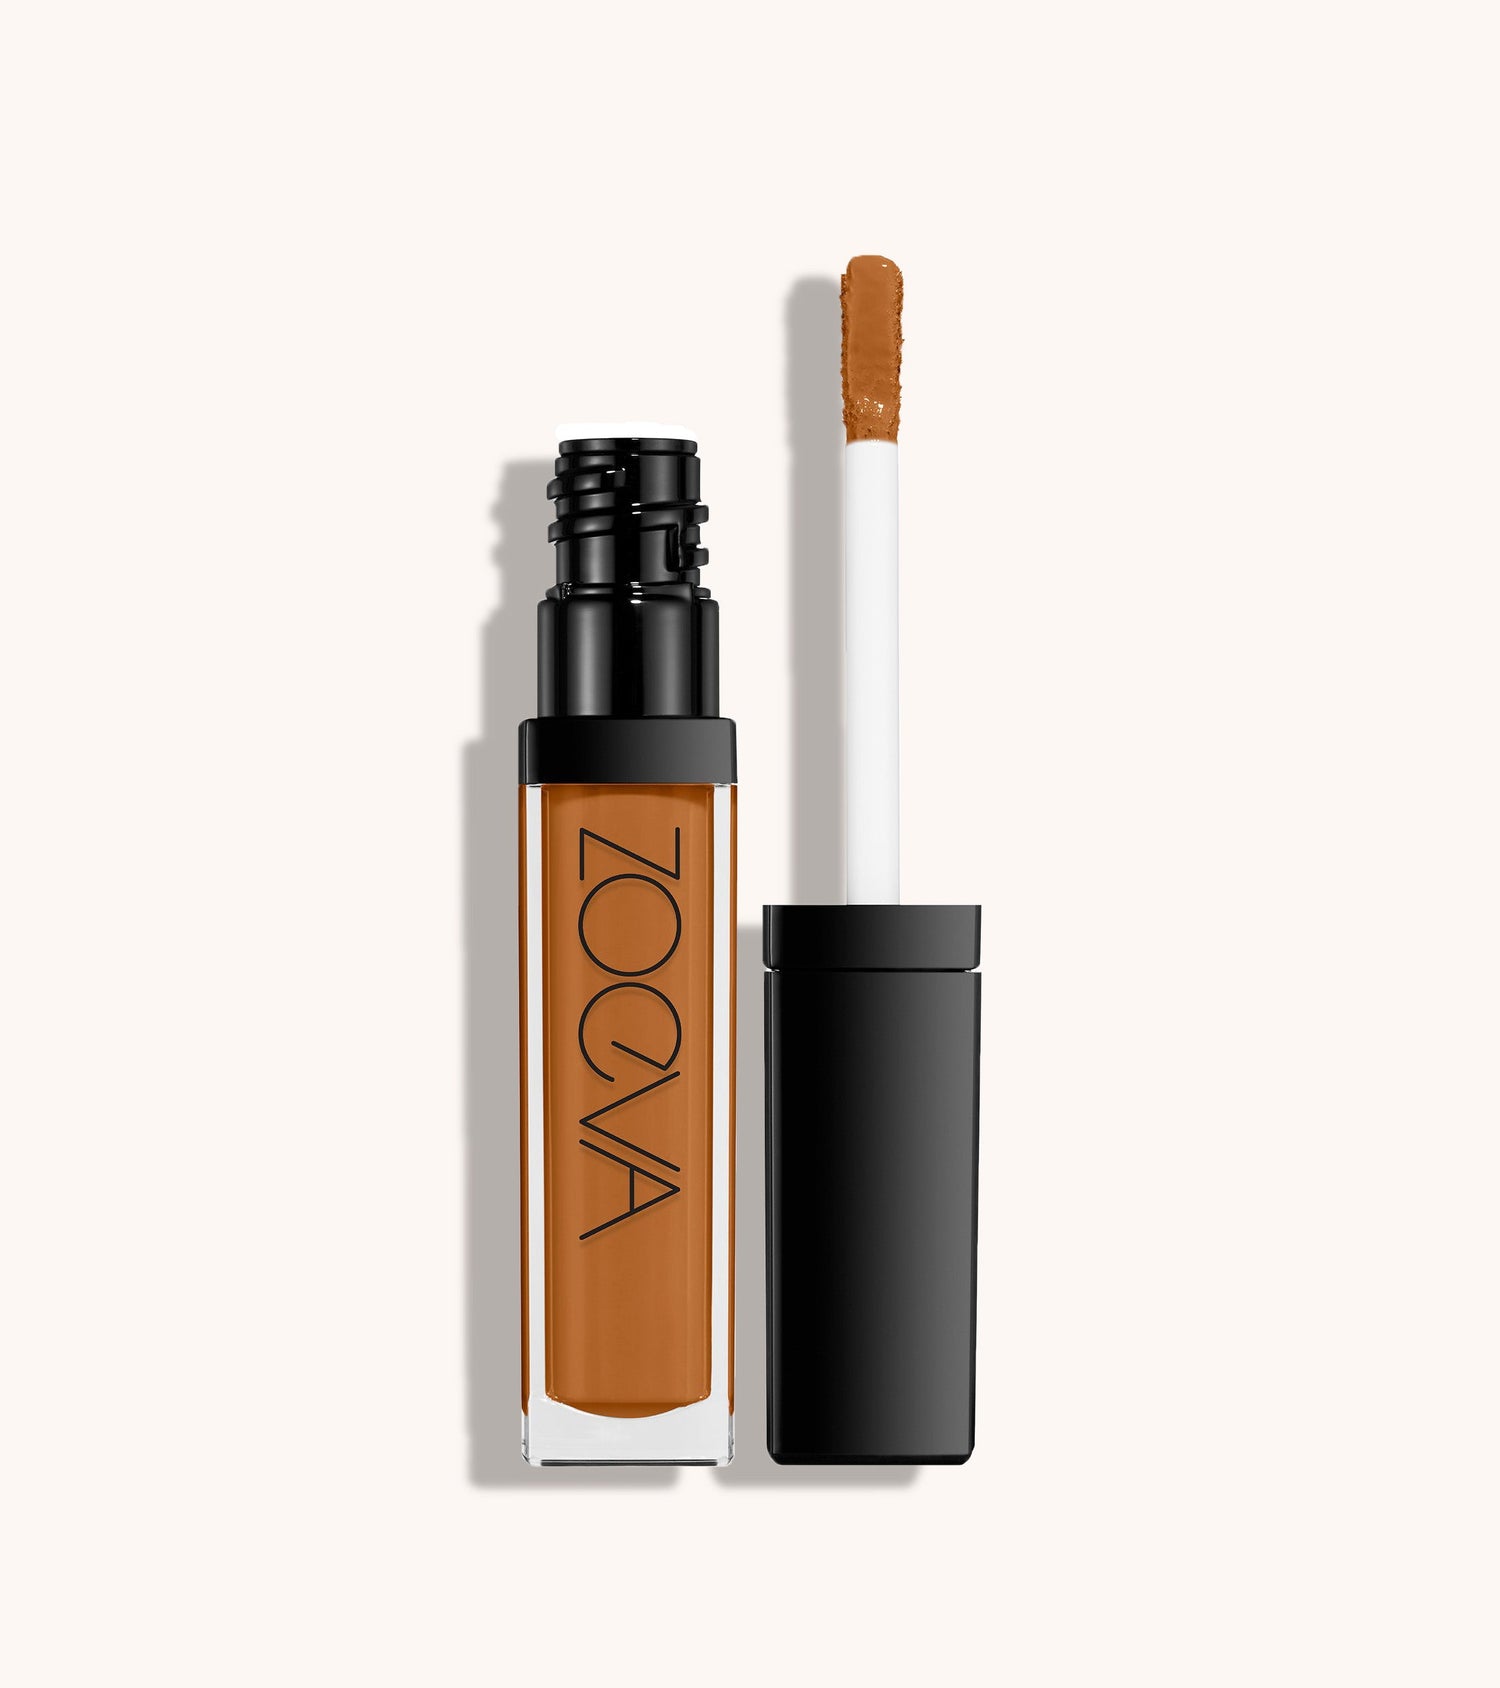 Authentik Skin Perfector Concealer (270 Trusty) Main Image featured